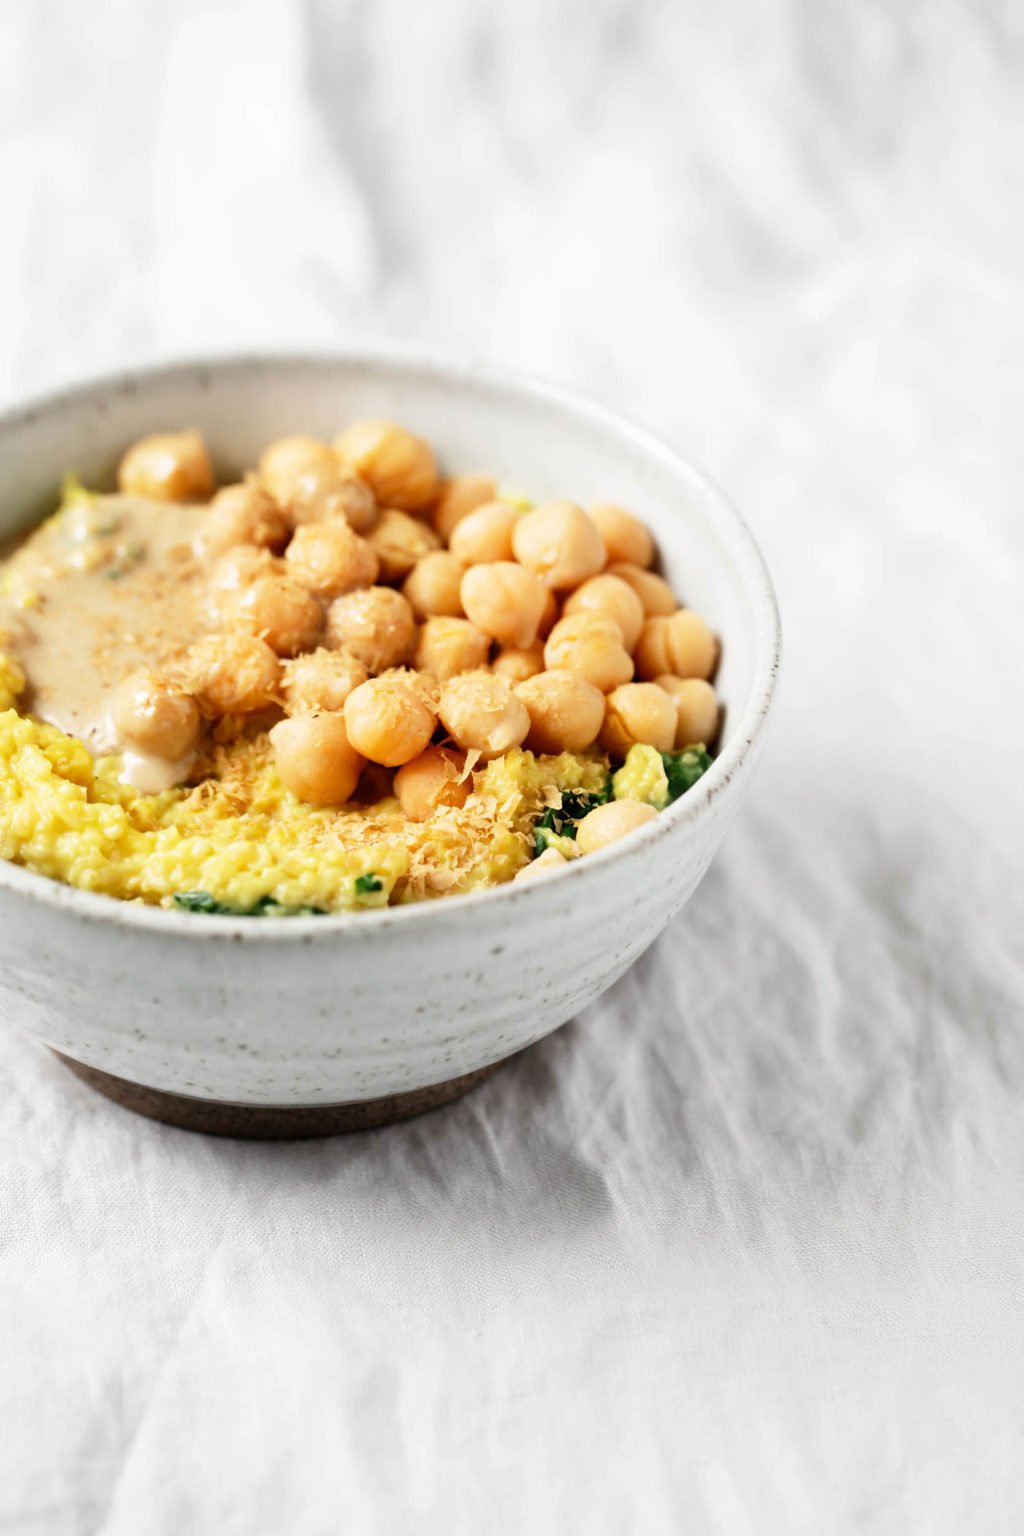 An angled shot of a bowl of savory oatmeal, which has been topped with tahini and chickpeas.